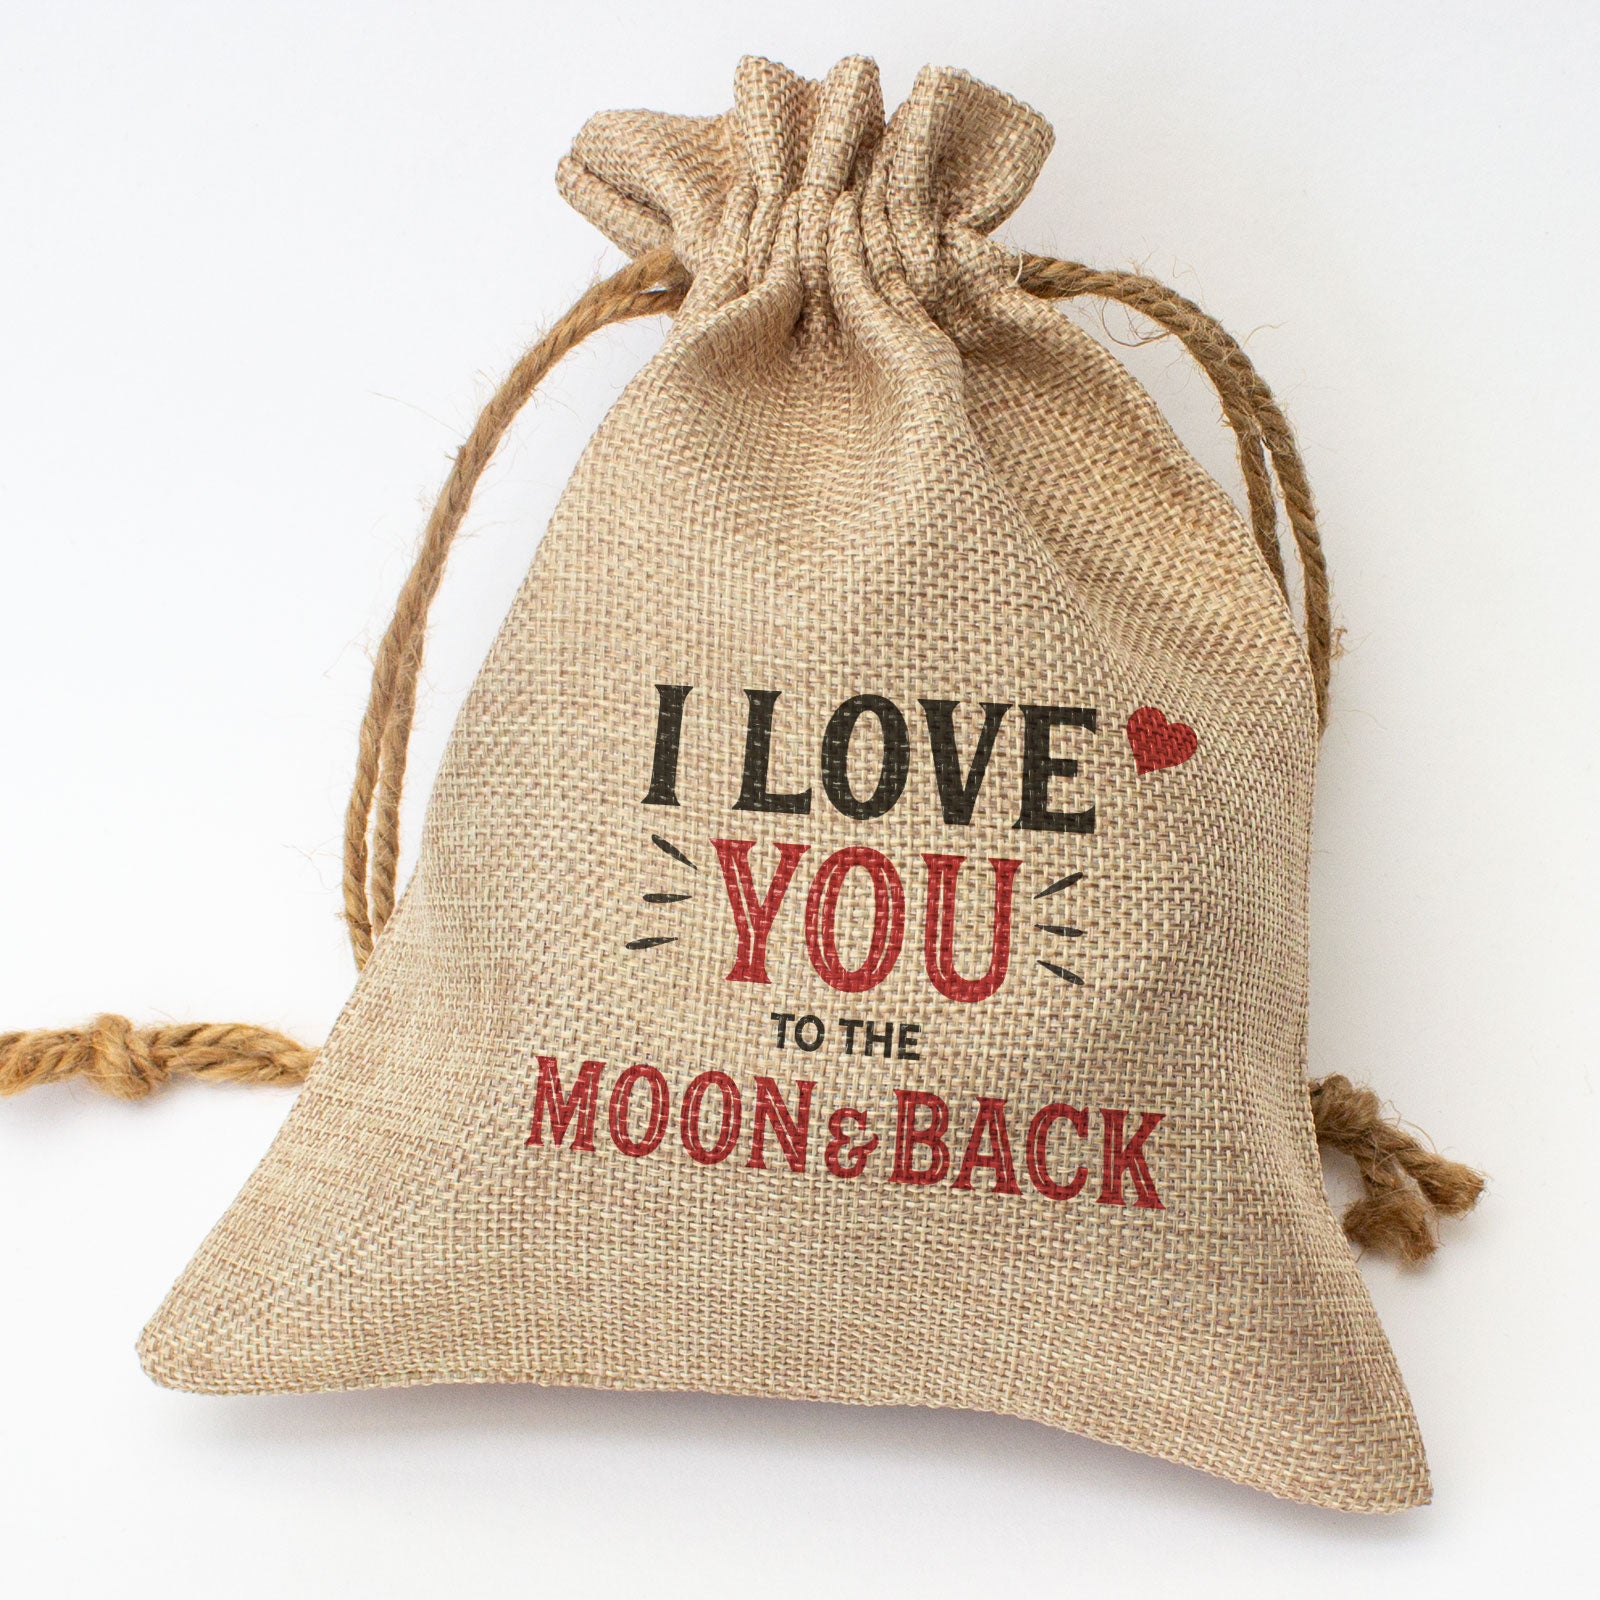 I LOVE YOU TO THE MOON AND BACK - Toasted Coconut Bowl Candle – Soy Wax - Gift Present